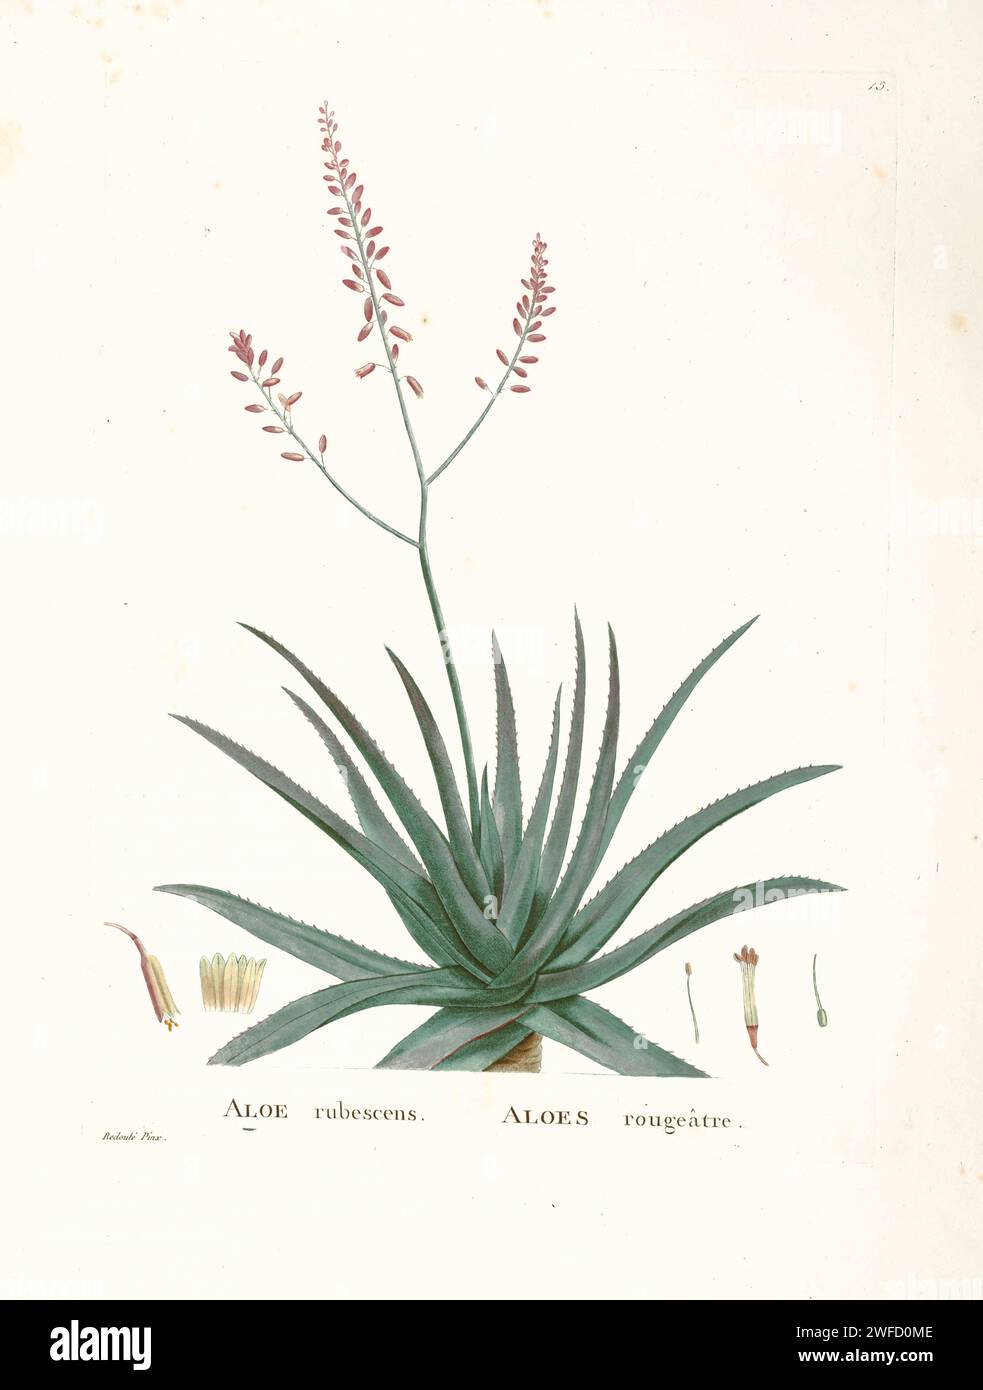 Aloe vera L. officinalis (Forsk.) Bak. Here As Aloe rubescens from History of Succulent Plants [Plantarum historia succulentarum / Histoire des plantes grasses] painted by Pierre-Joseph Redouté and described by Augustin Pyramus de Candolle Aloe vera is a succulent plant species of the genus Aloe. It is widely distributed, and is considered an invasive species in many world regions. An evergreen perennial, it originates from the Arabian Peninsula, but also grows wild in tropical, semi-tropical, and arid climates around the world. Stock Photo